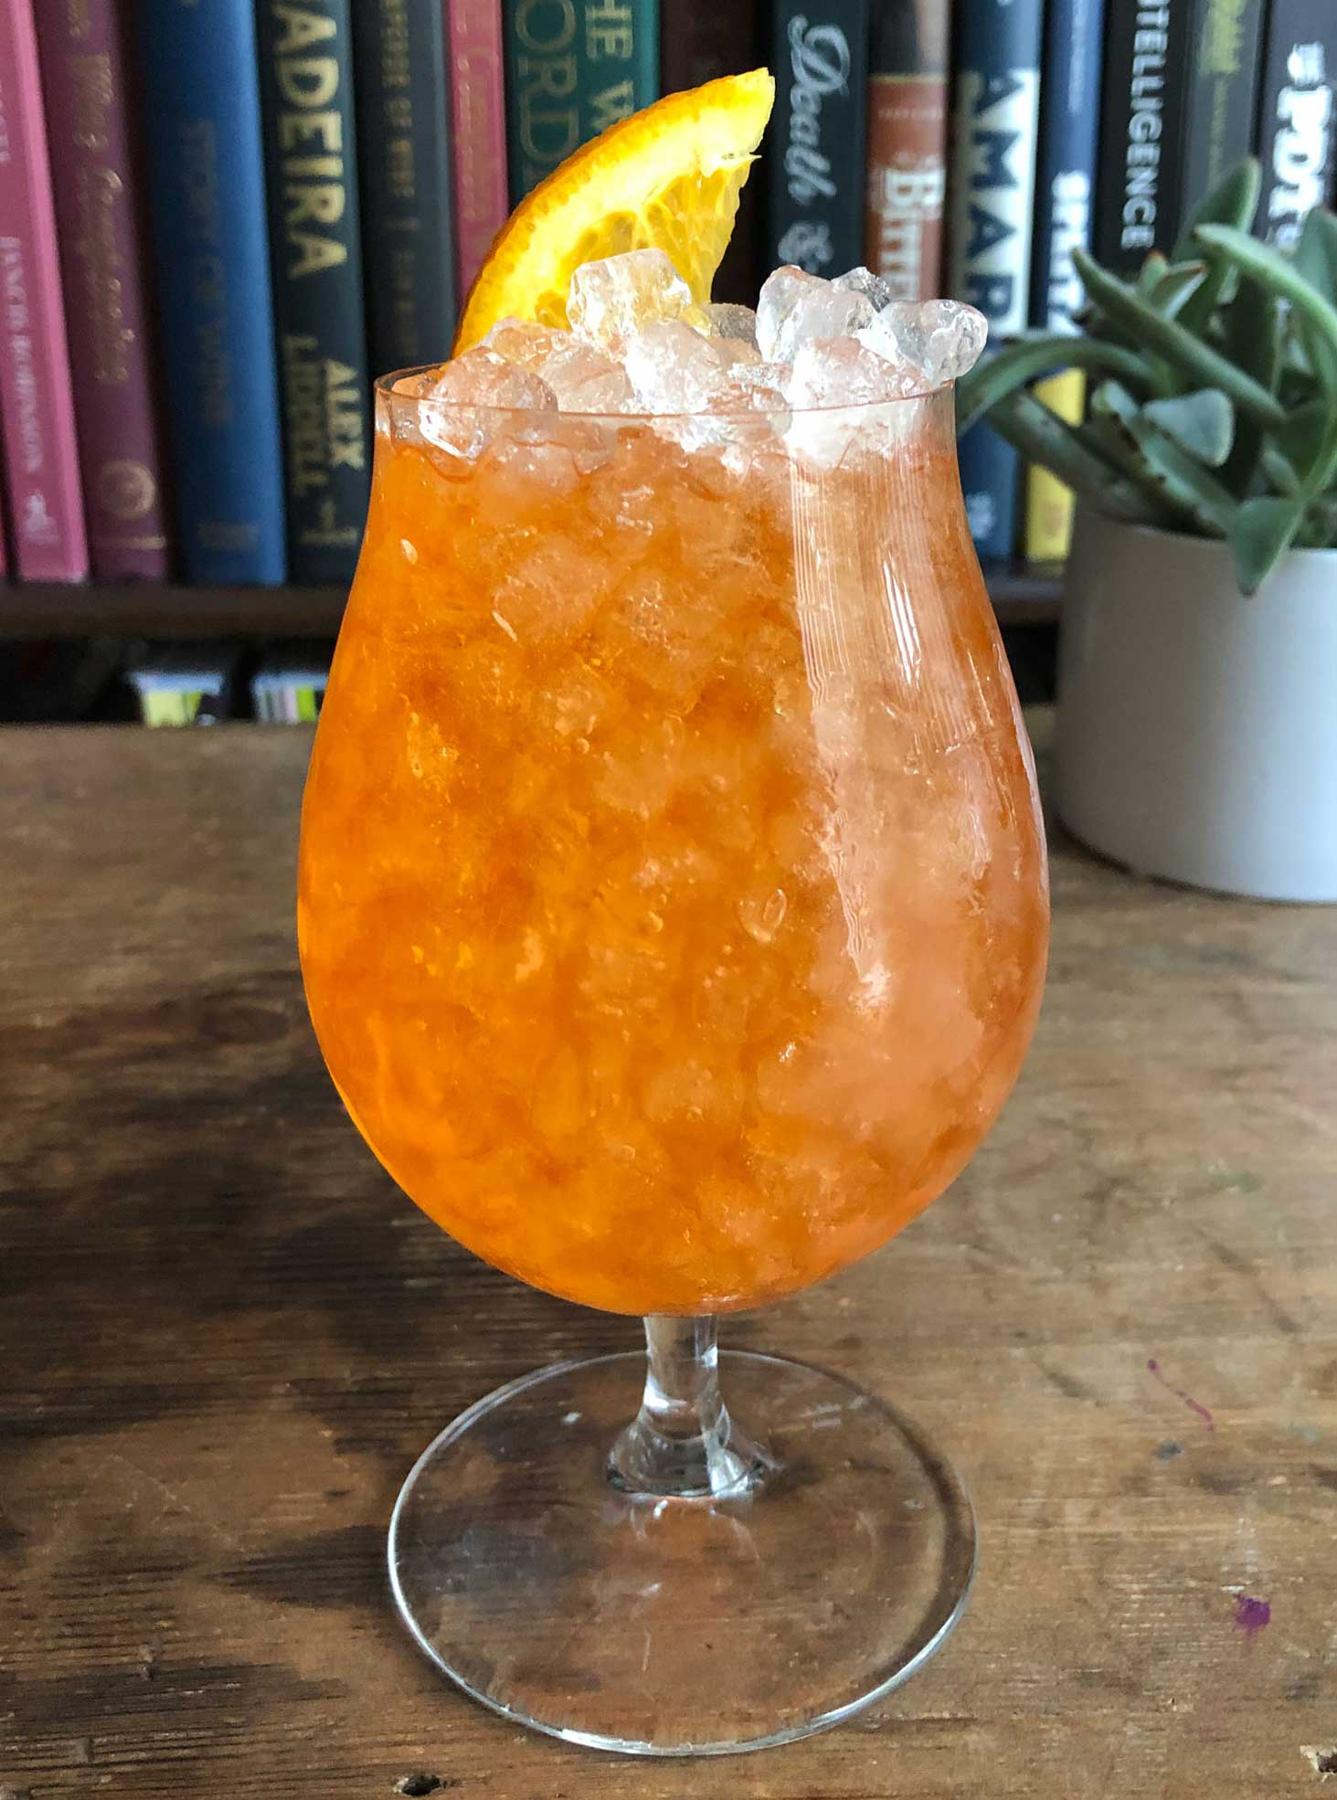 An example of the Spritz Originale, the mixed drink (drink) featuring sparkling wine, Aperitivo Cappelletti, and orange wheel; photo by Lee Edwards